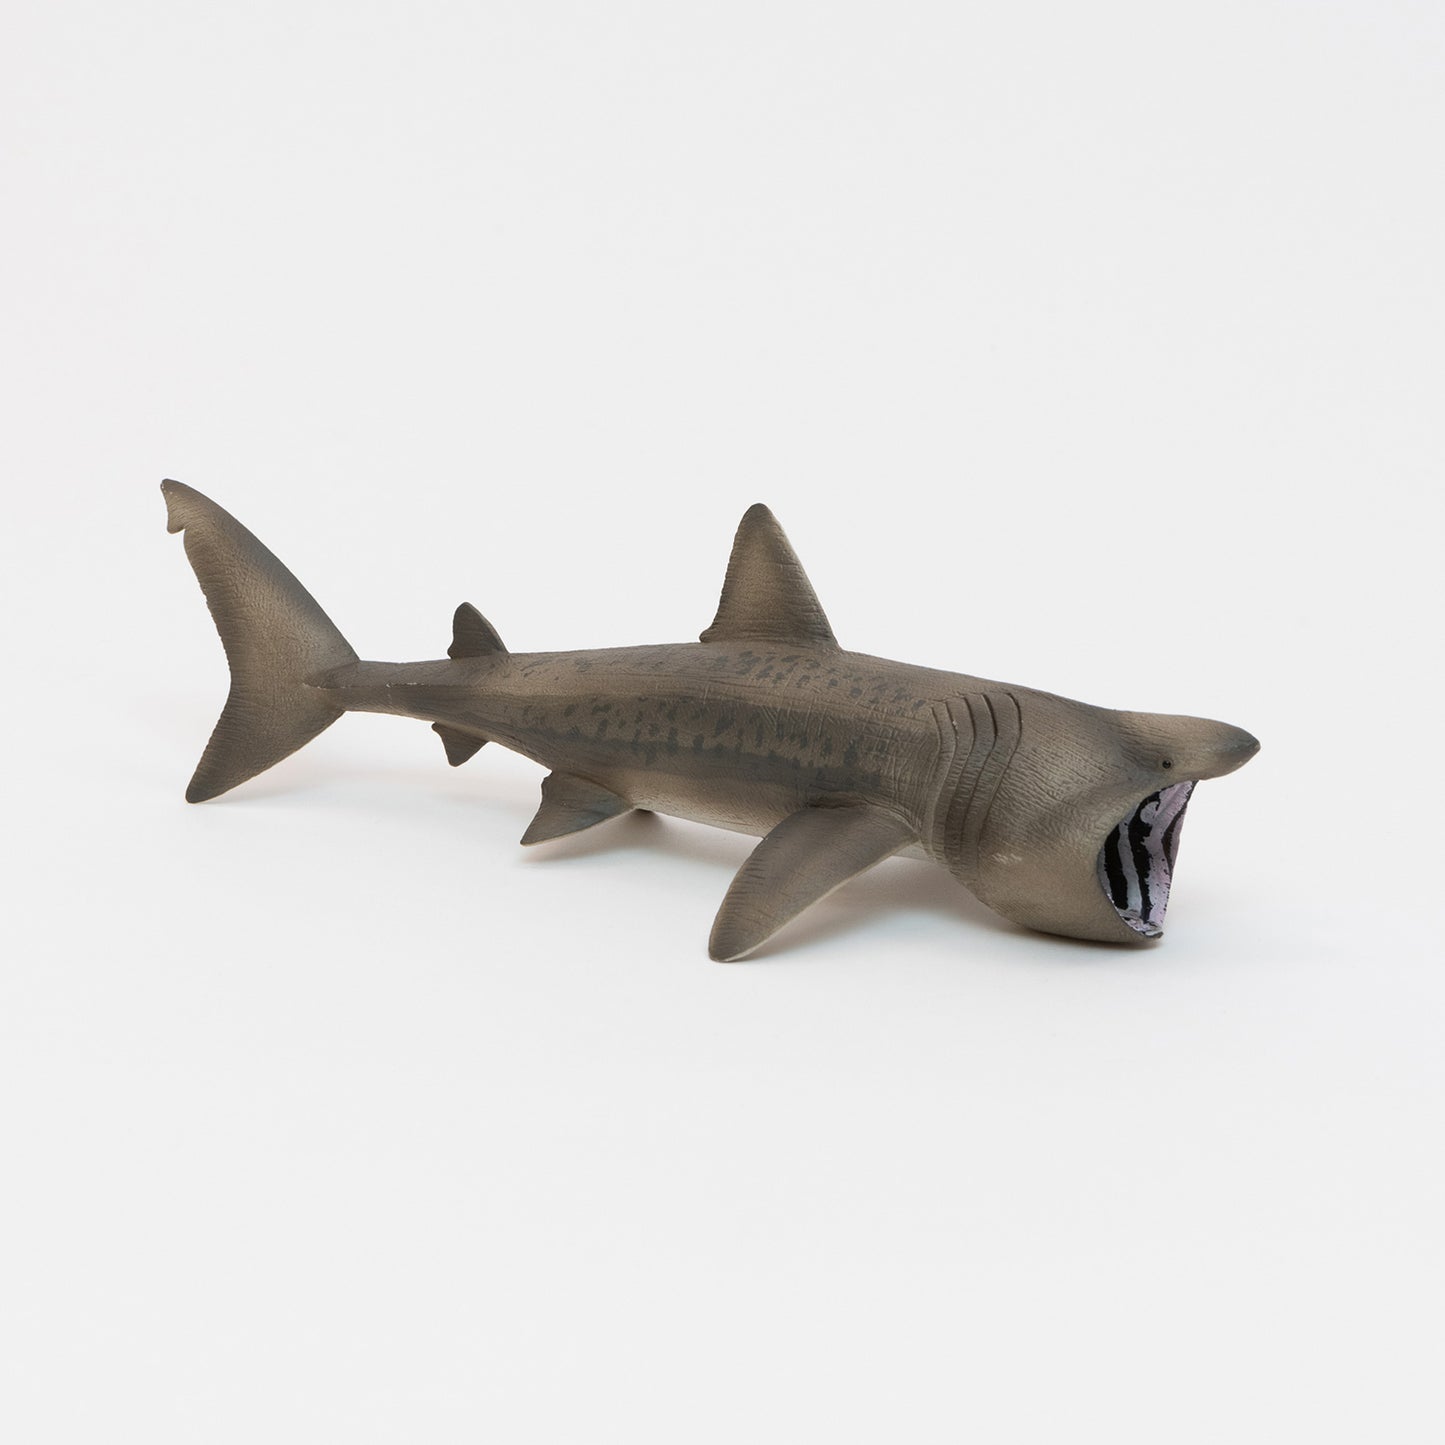 A basking shark plastic toy on a white background.